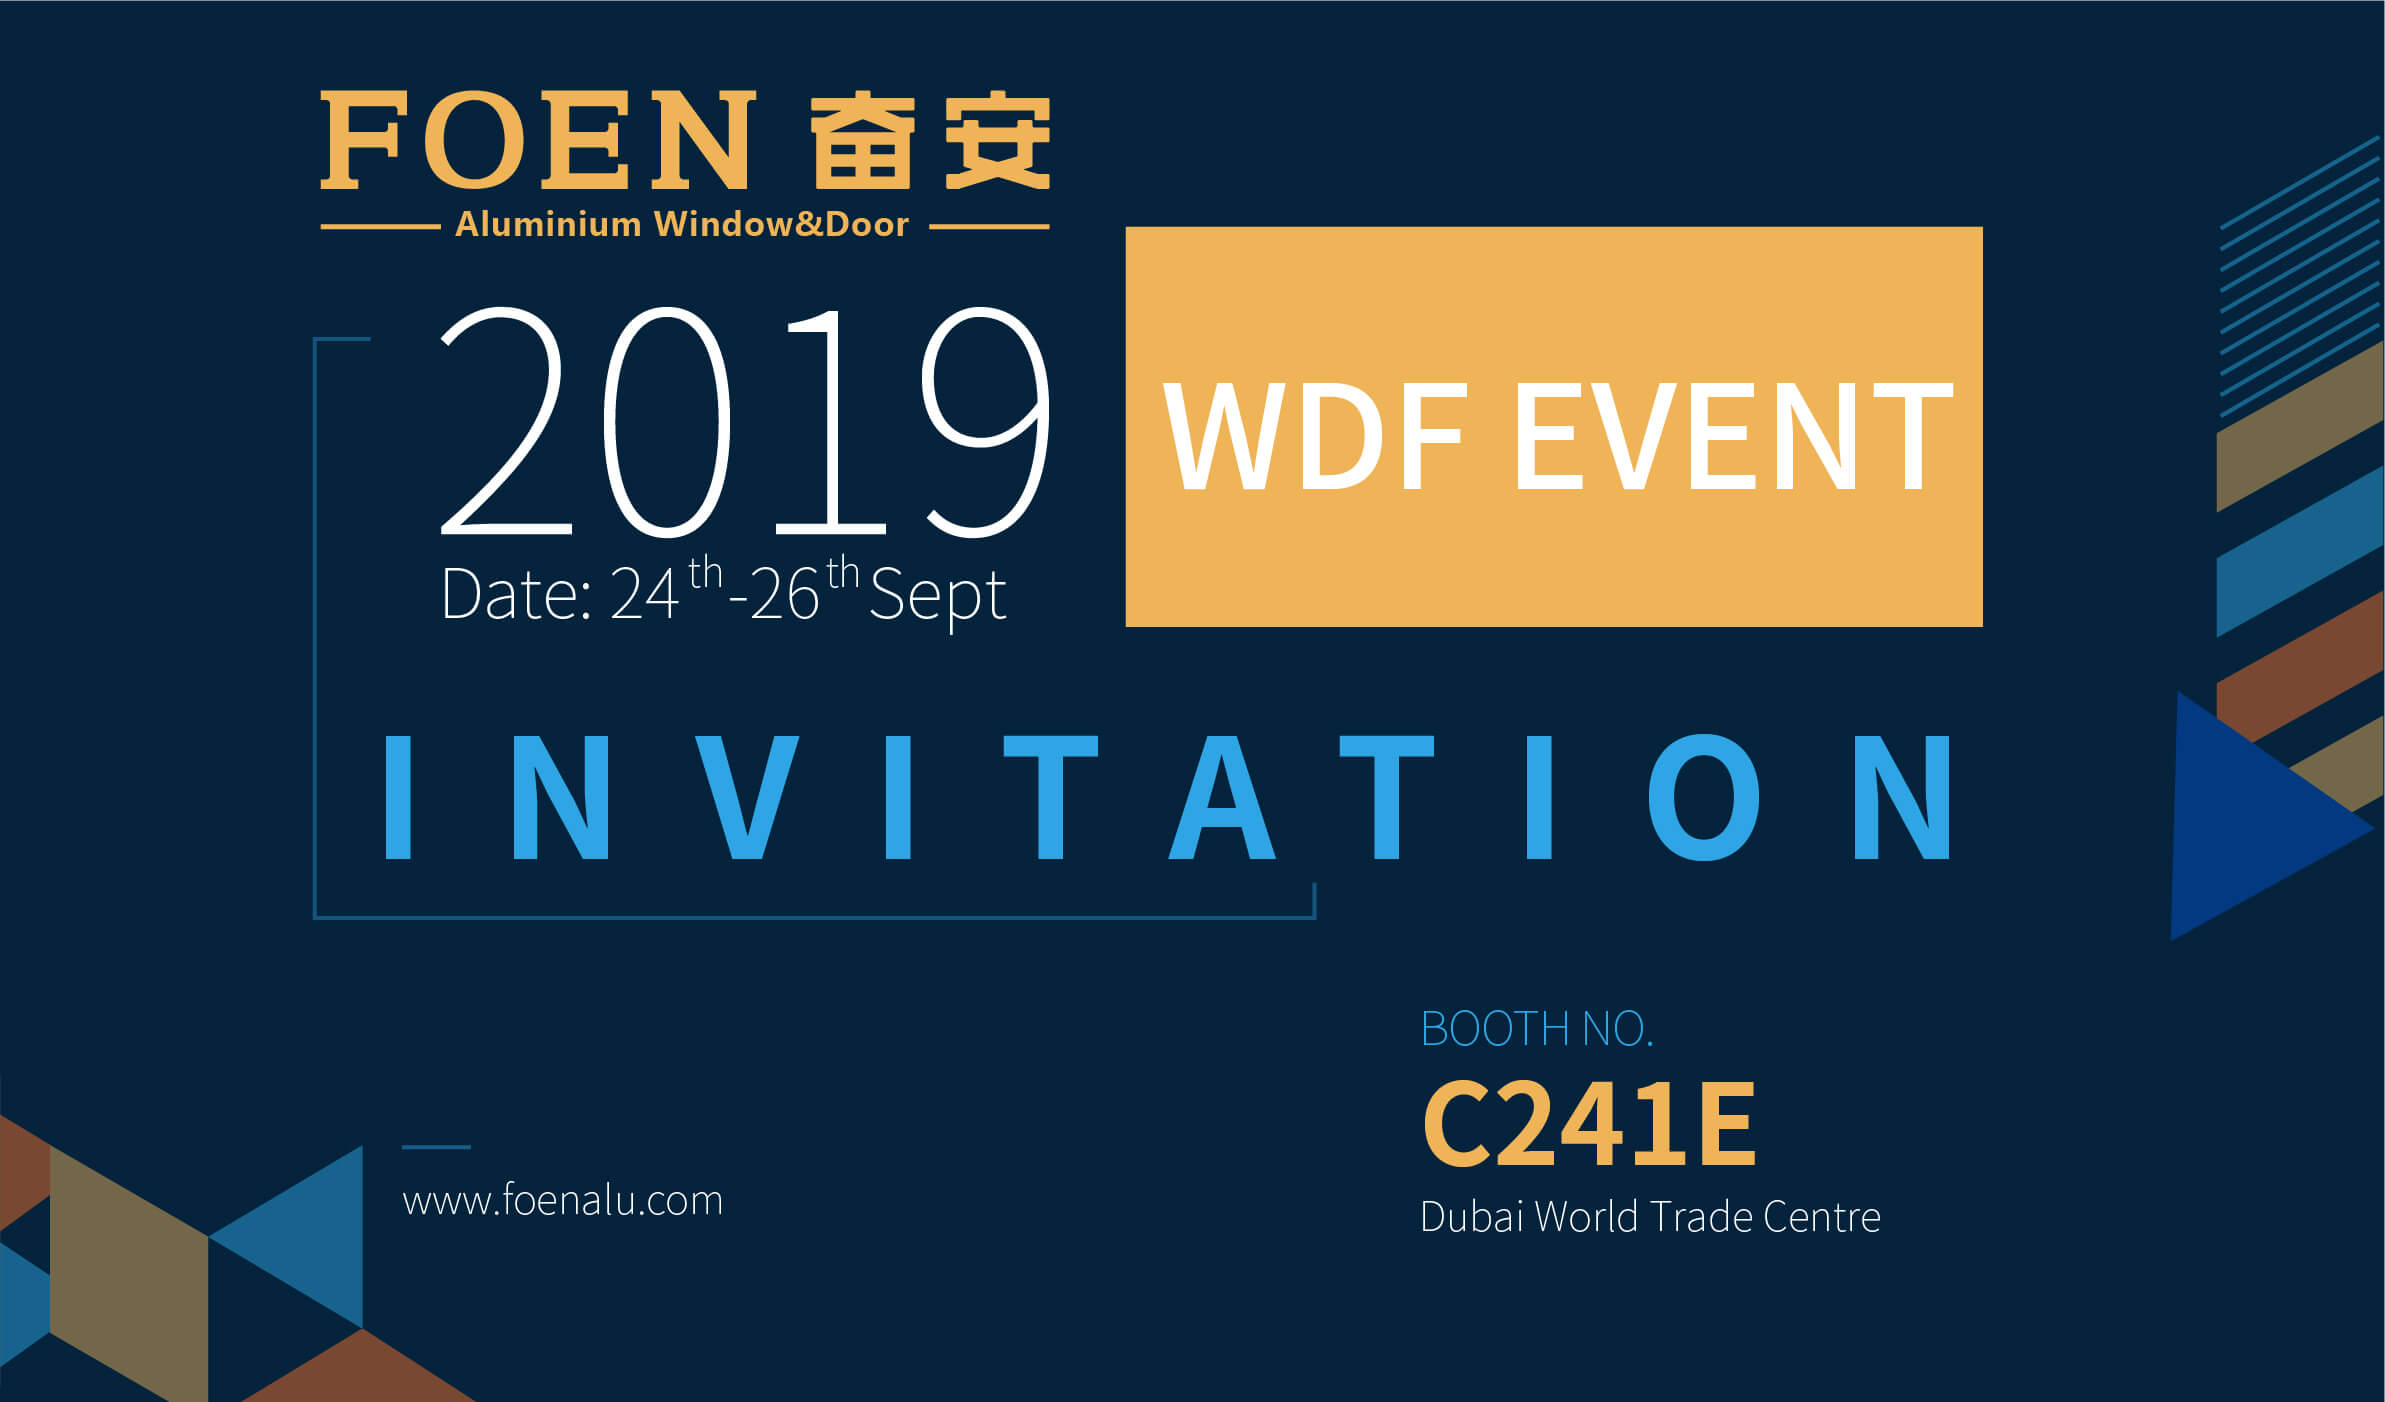 Welcome to WDF EVENT